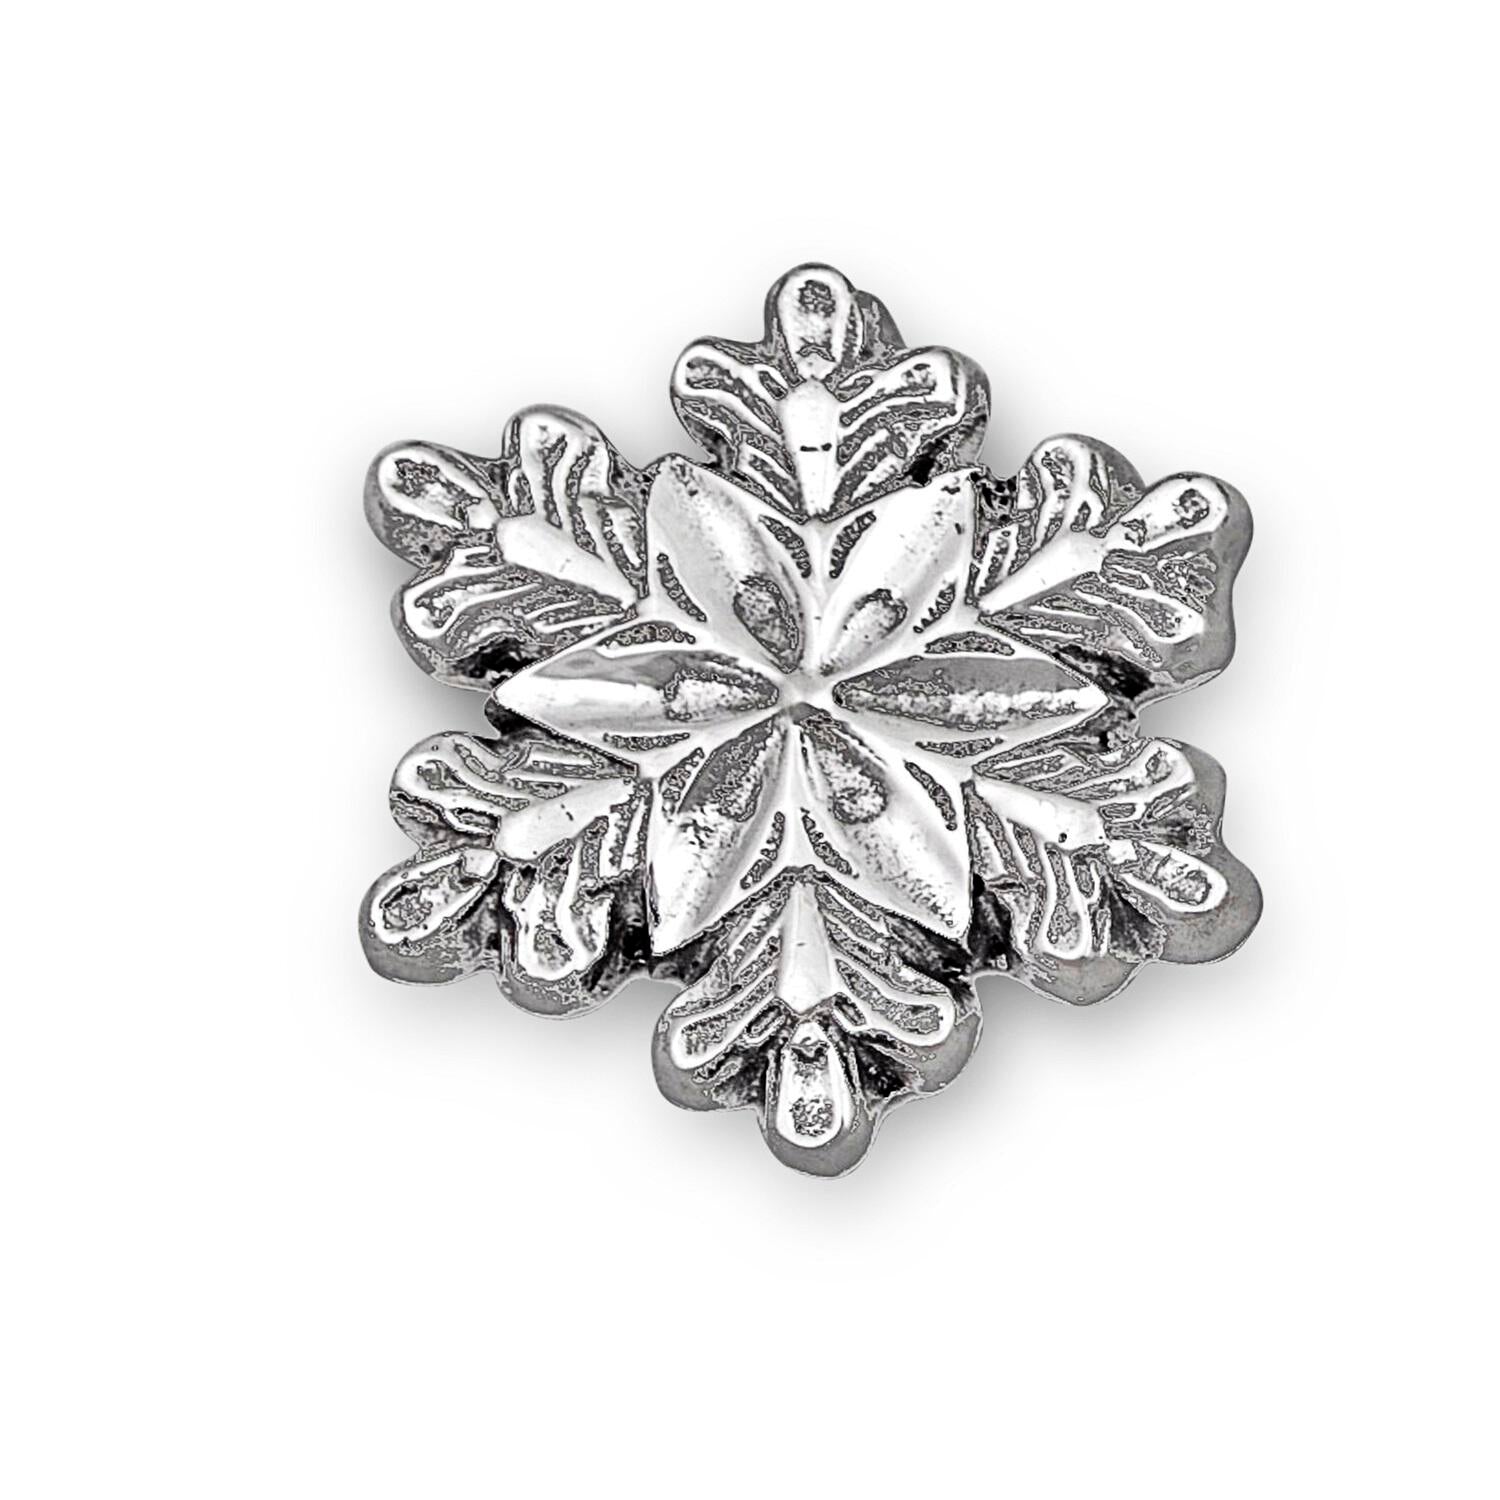 GIFTABLES Holiday Snowflake Weight